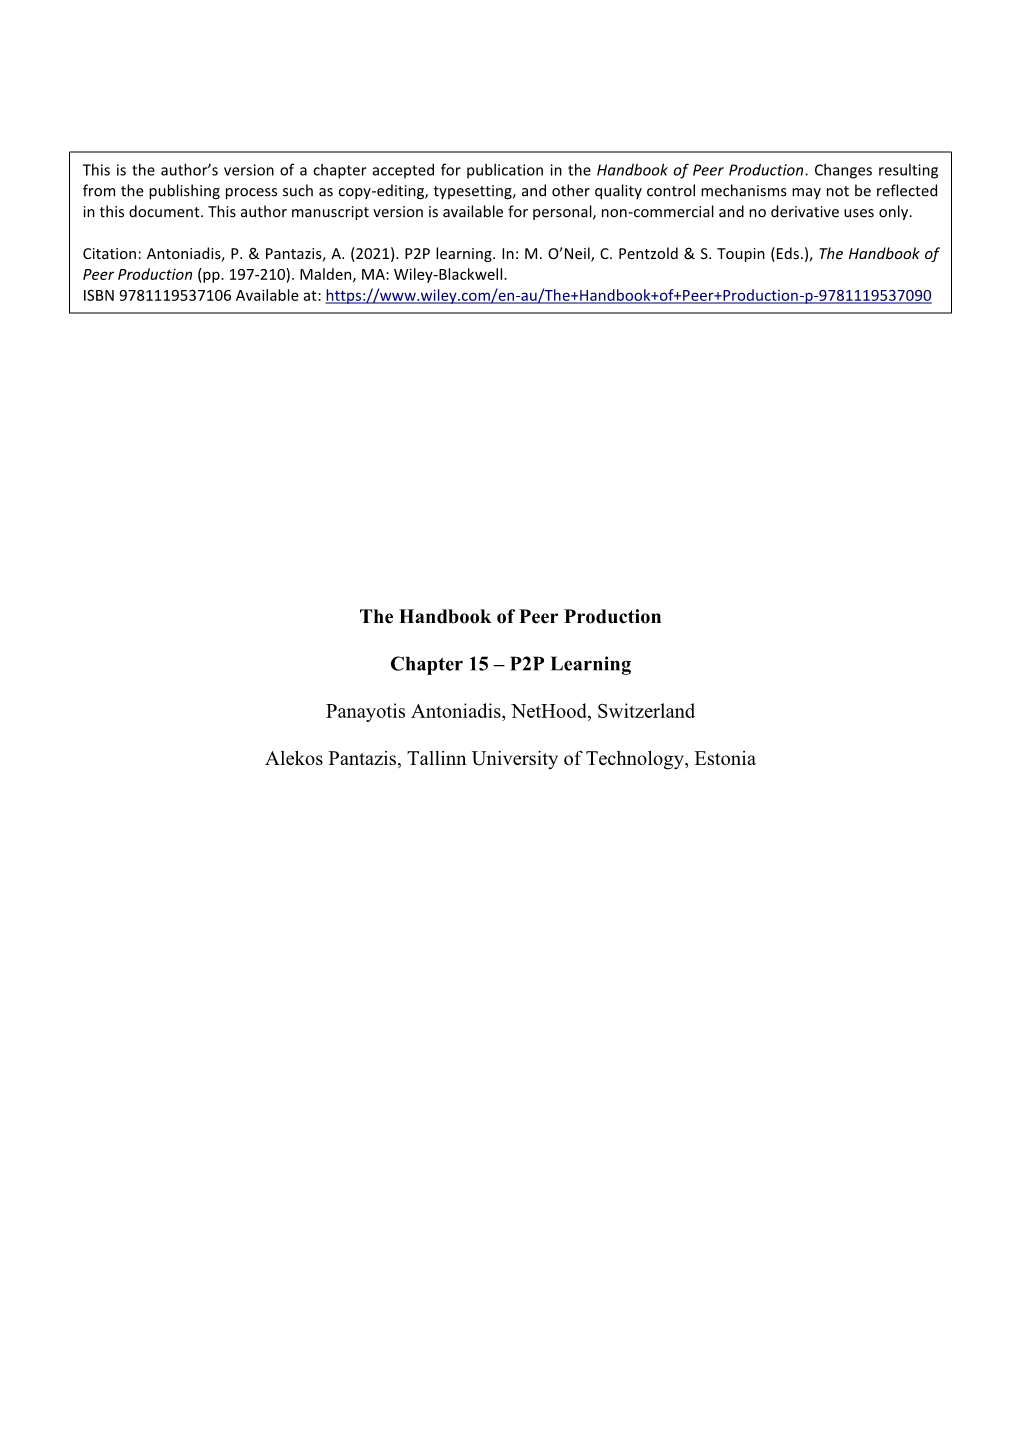 The Handbook of Peer Production Chapter 15 – P2P Learning